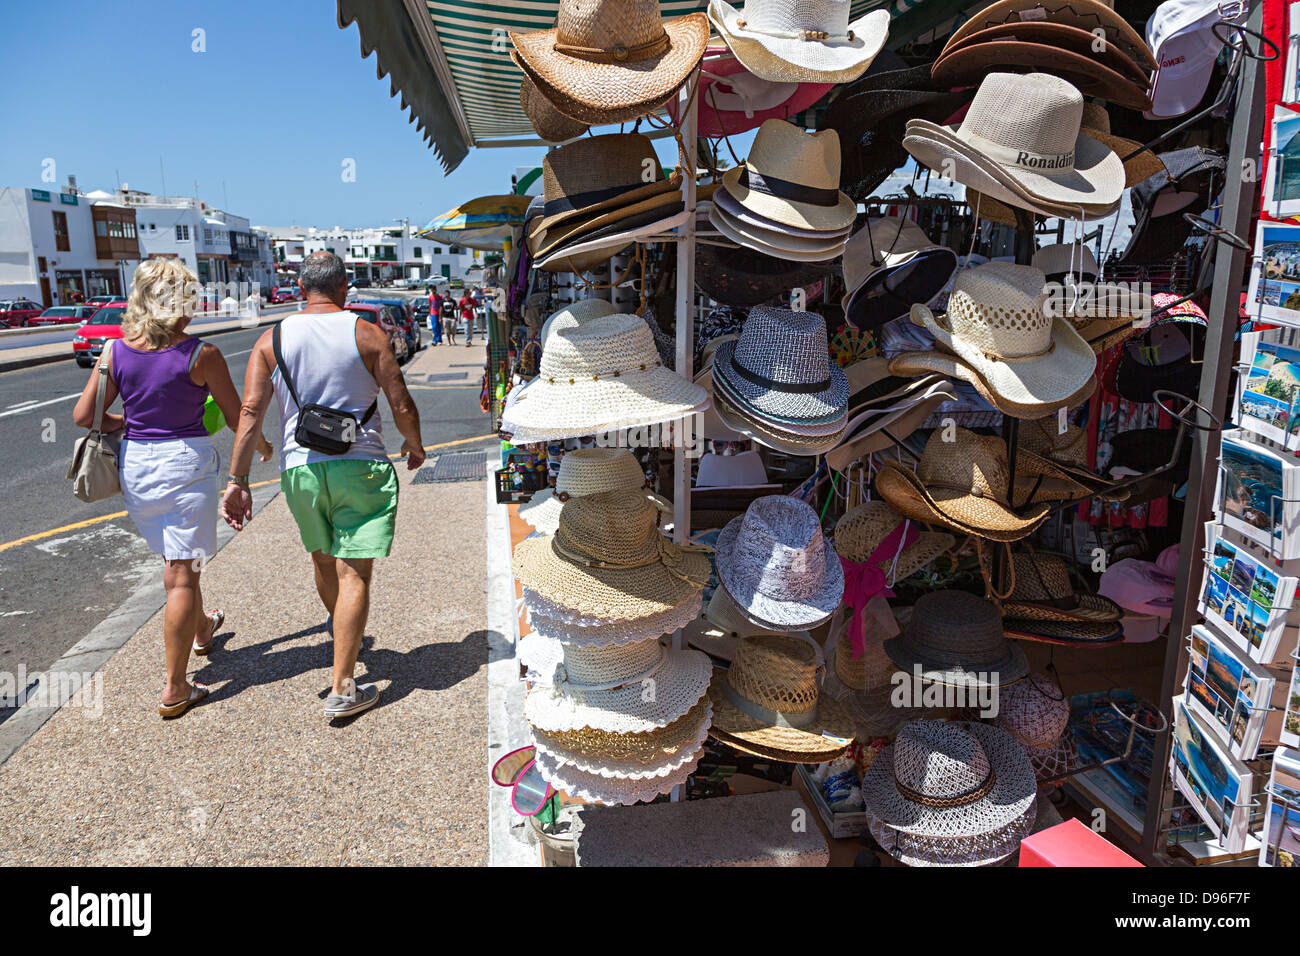 Hats on sale in tourist shop on beach front, Playa Blanca, Lanzarote, Canary Islands, Spain Stock Photo